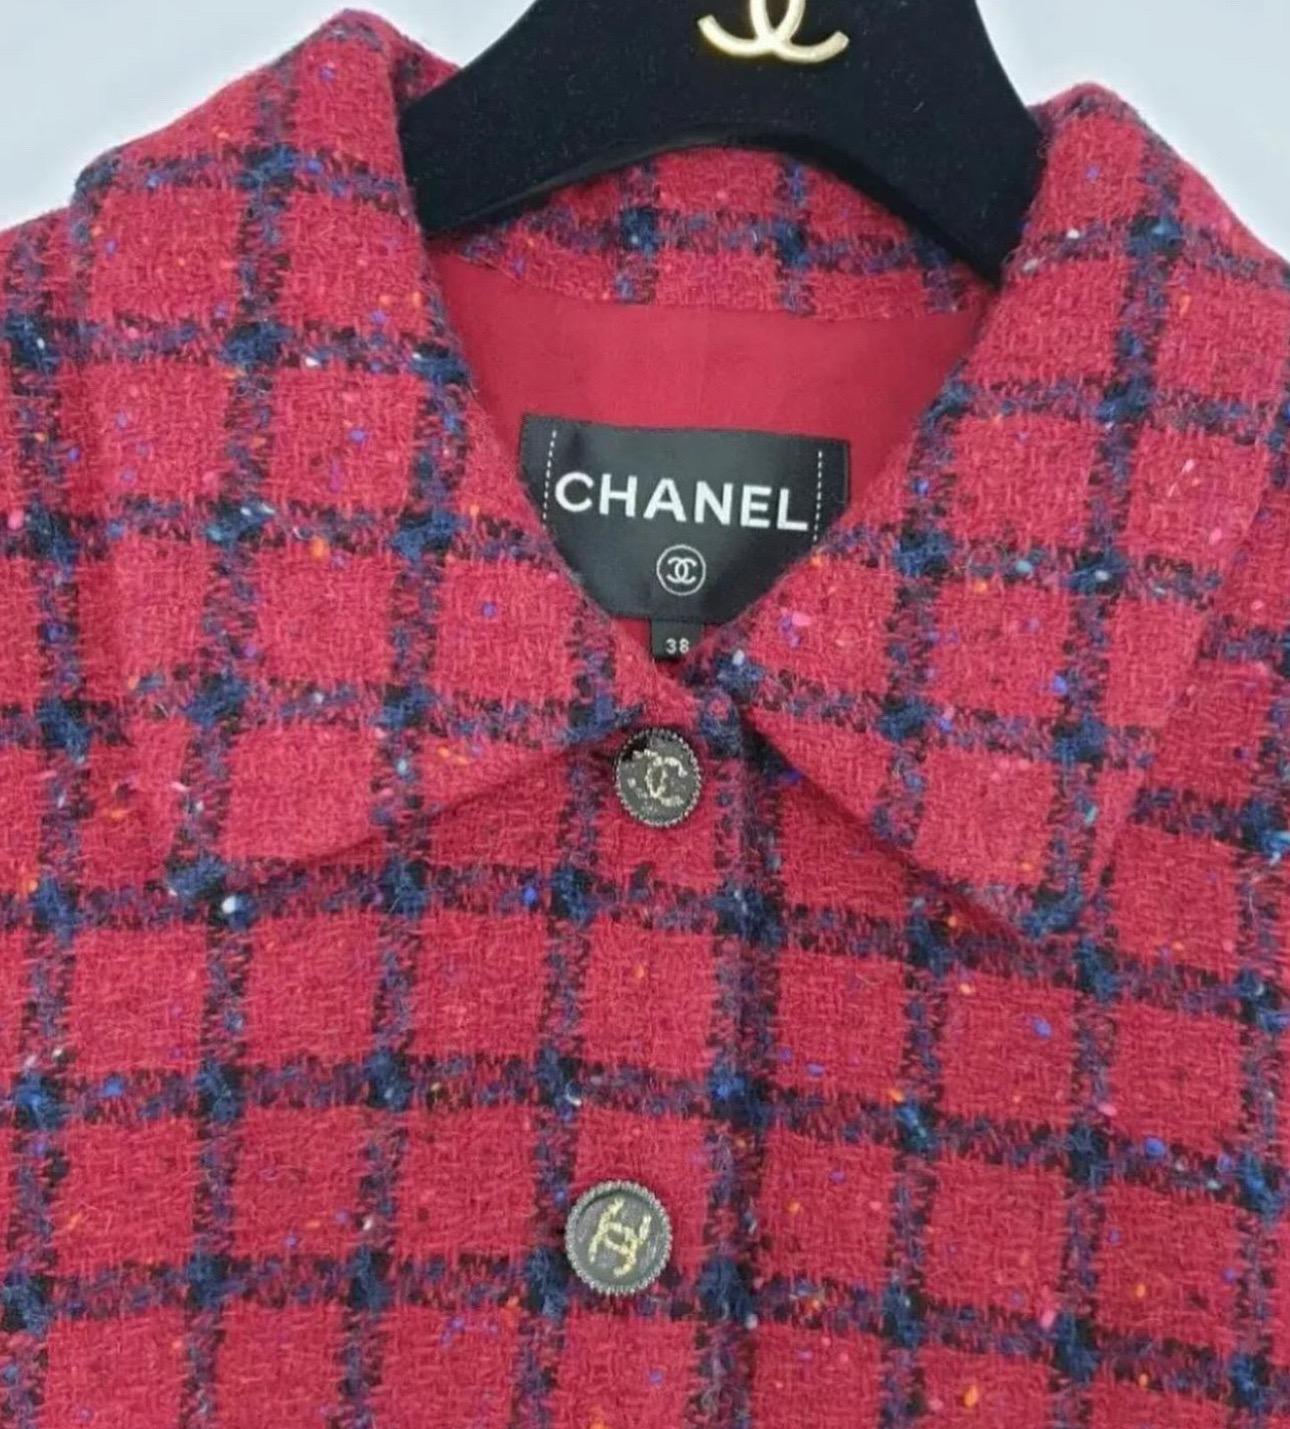 One of the best sellers of the collection - CHANEL 22K Runway Tweed Jacket 
Size-34 FR in Red/ Navy/ Multicolour.  
$9k+ retail and completely sold out.
Like new condition.